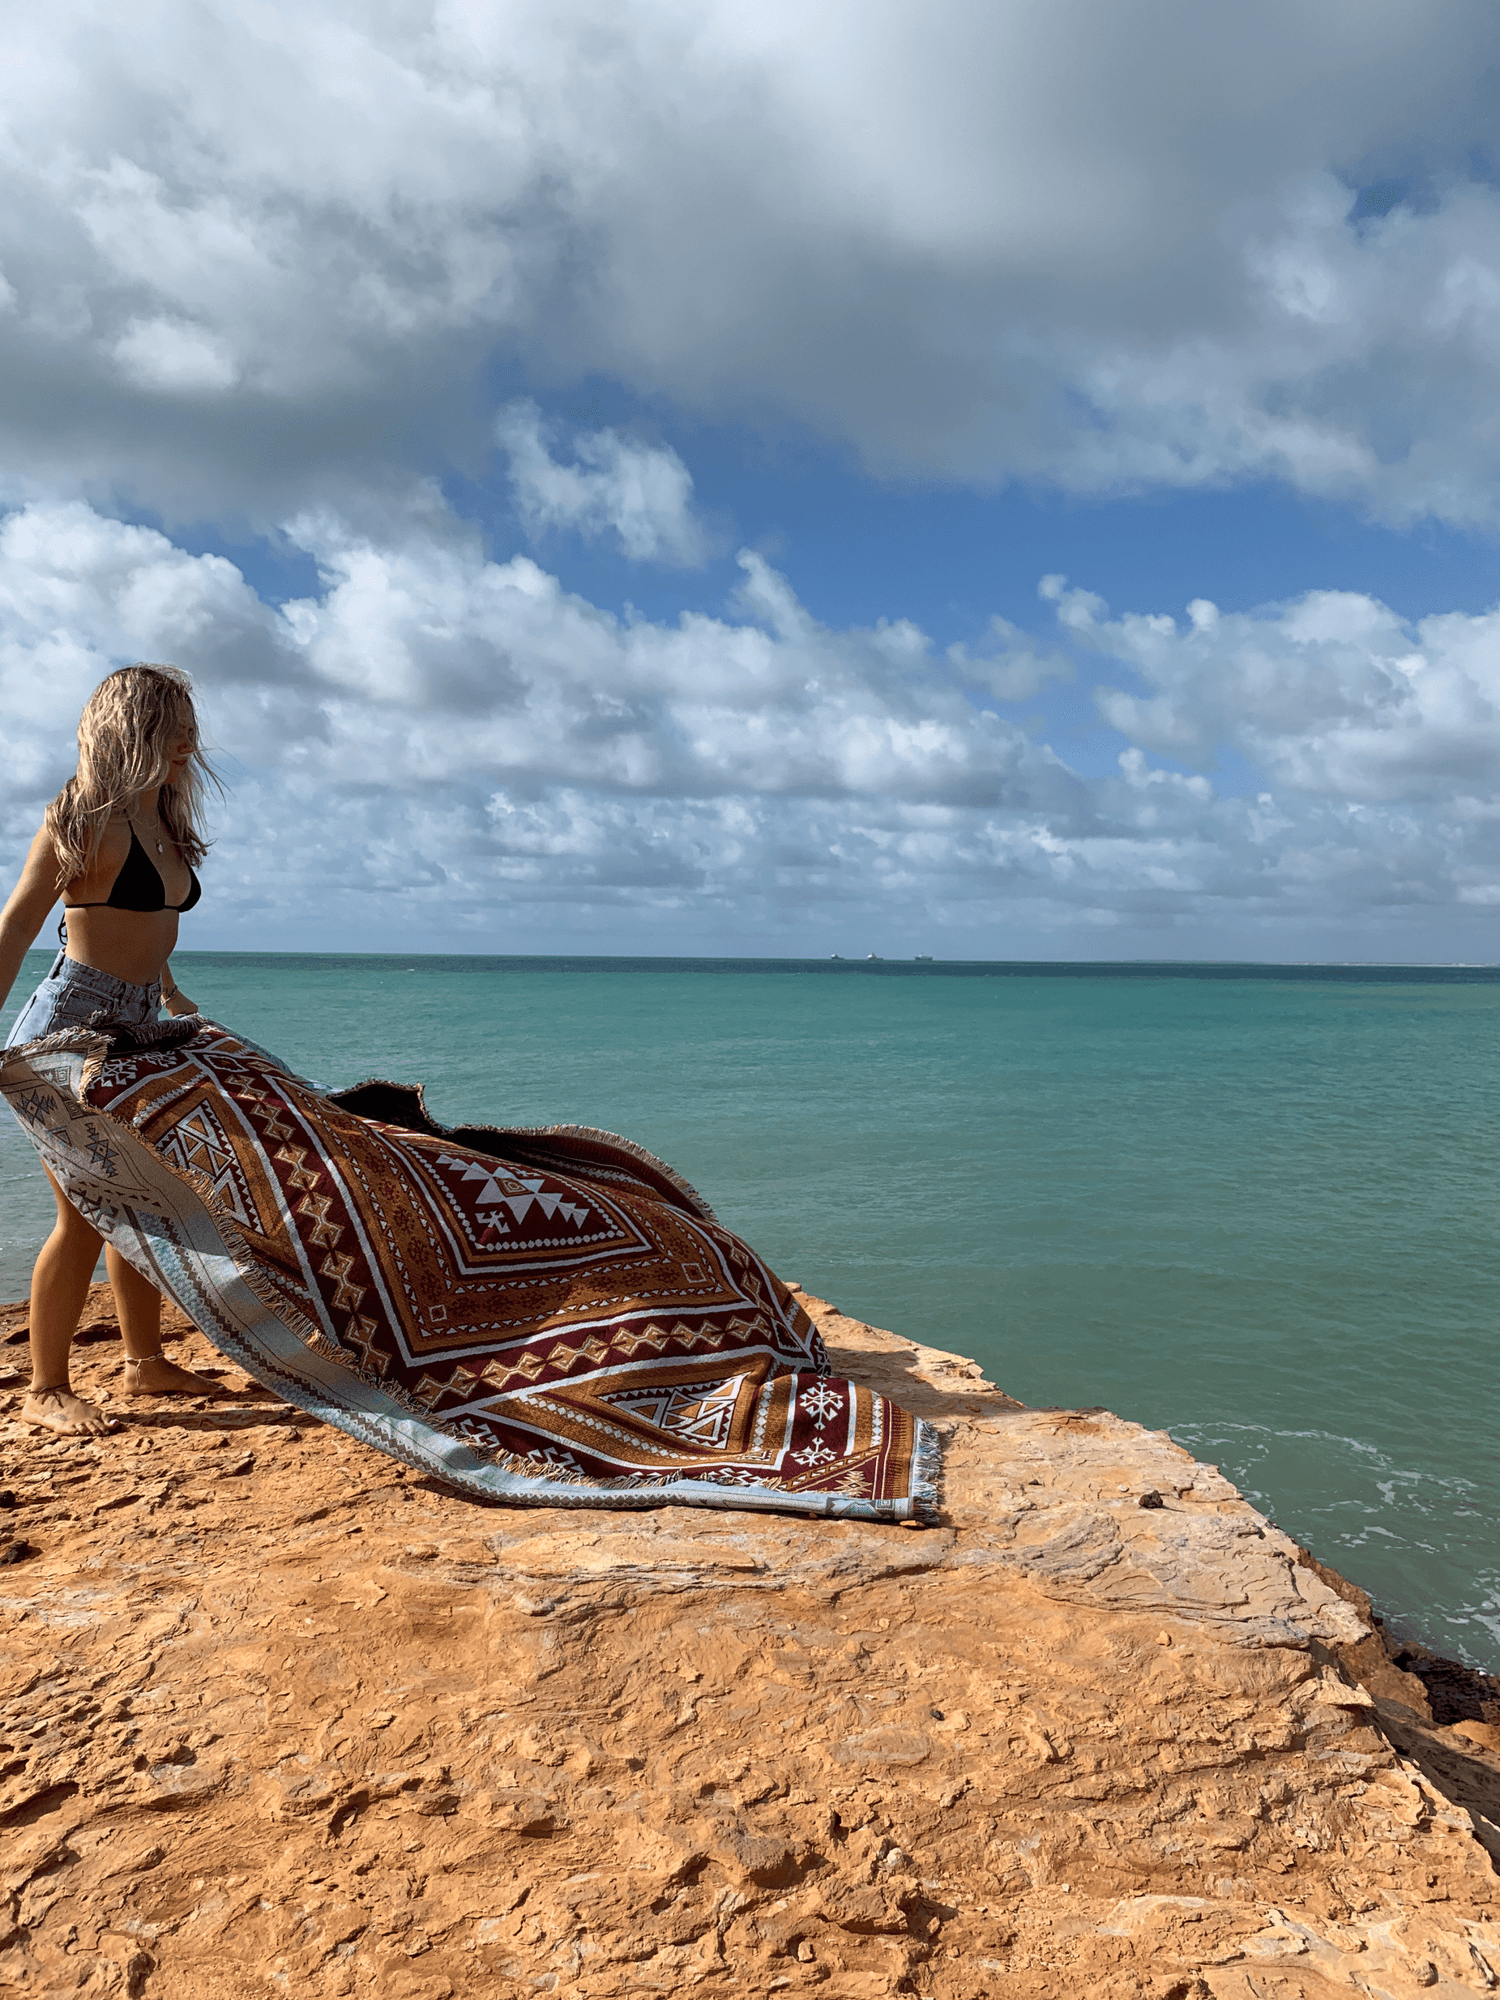 Desert Night throw being laid out on a rocks edge overlooking the ocean in Western Australia